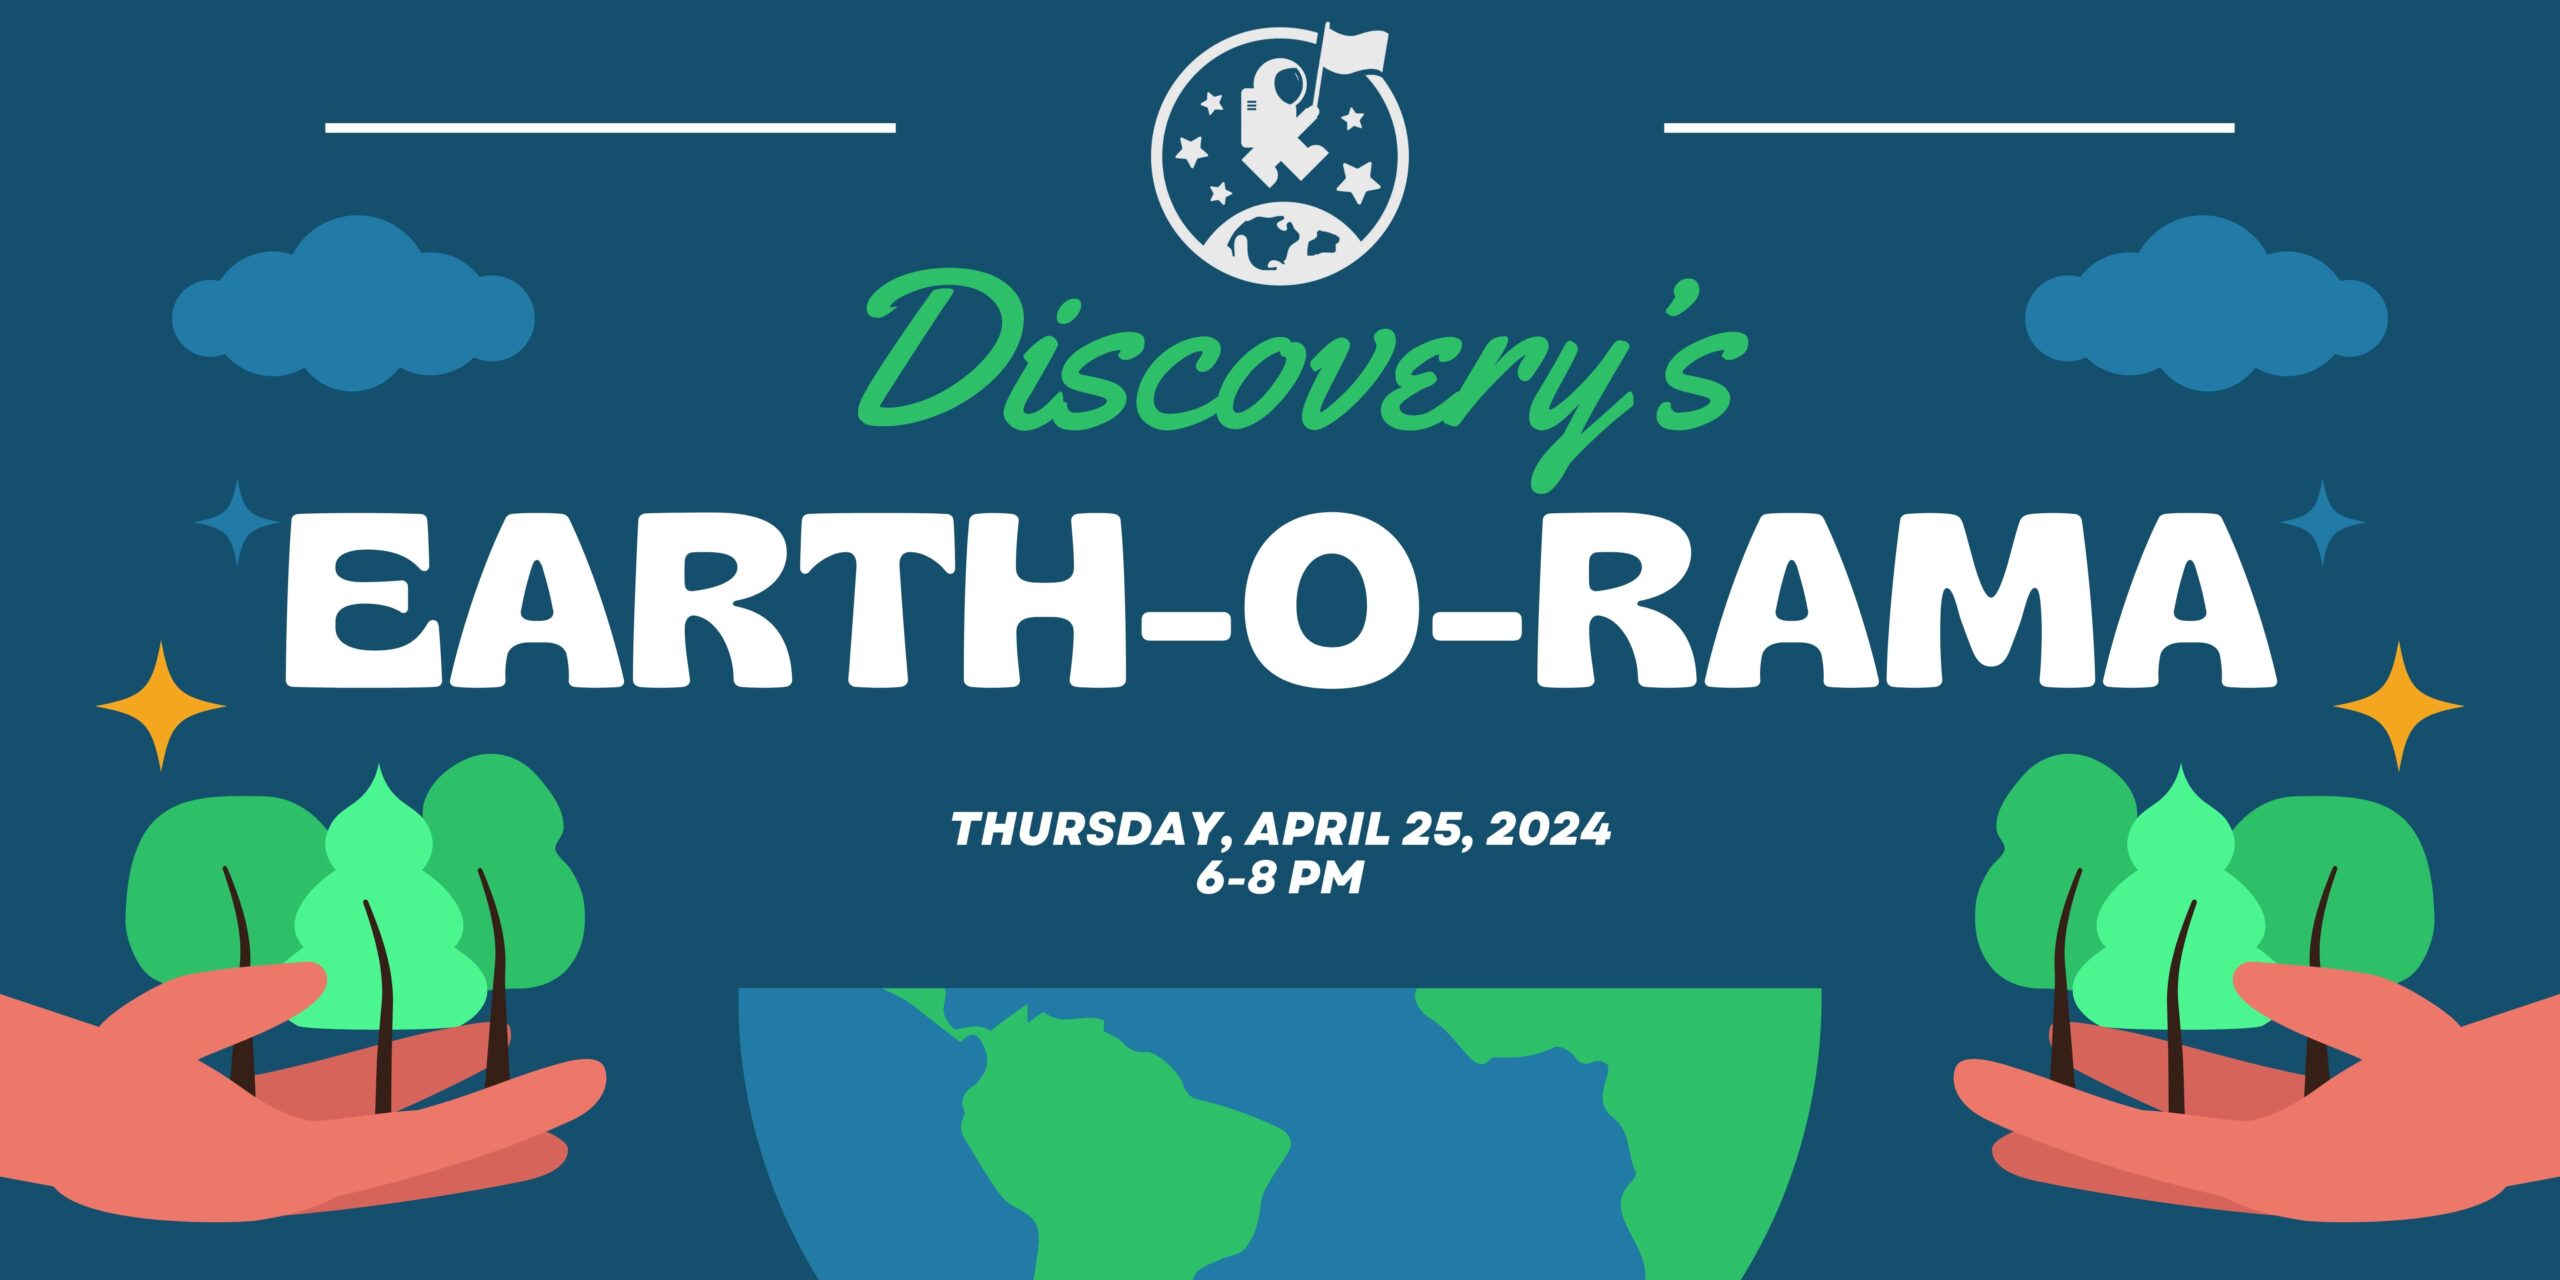 Banner with globe, hands holding trees, and text saying "Discovery's Earth-O-Rama, Thursday, APril 25, 2024, 6-8 pm"